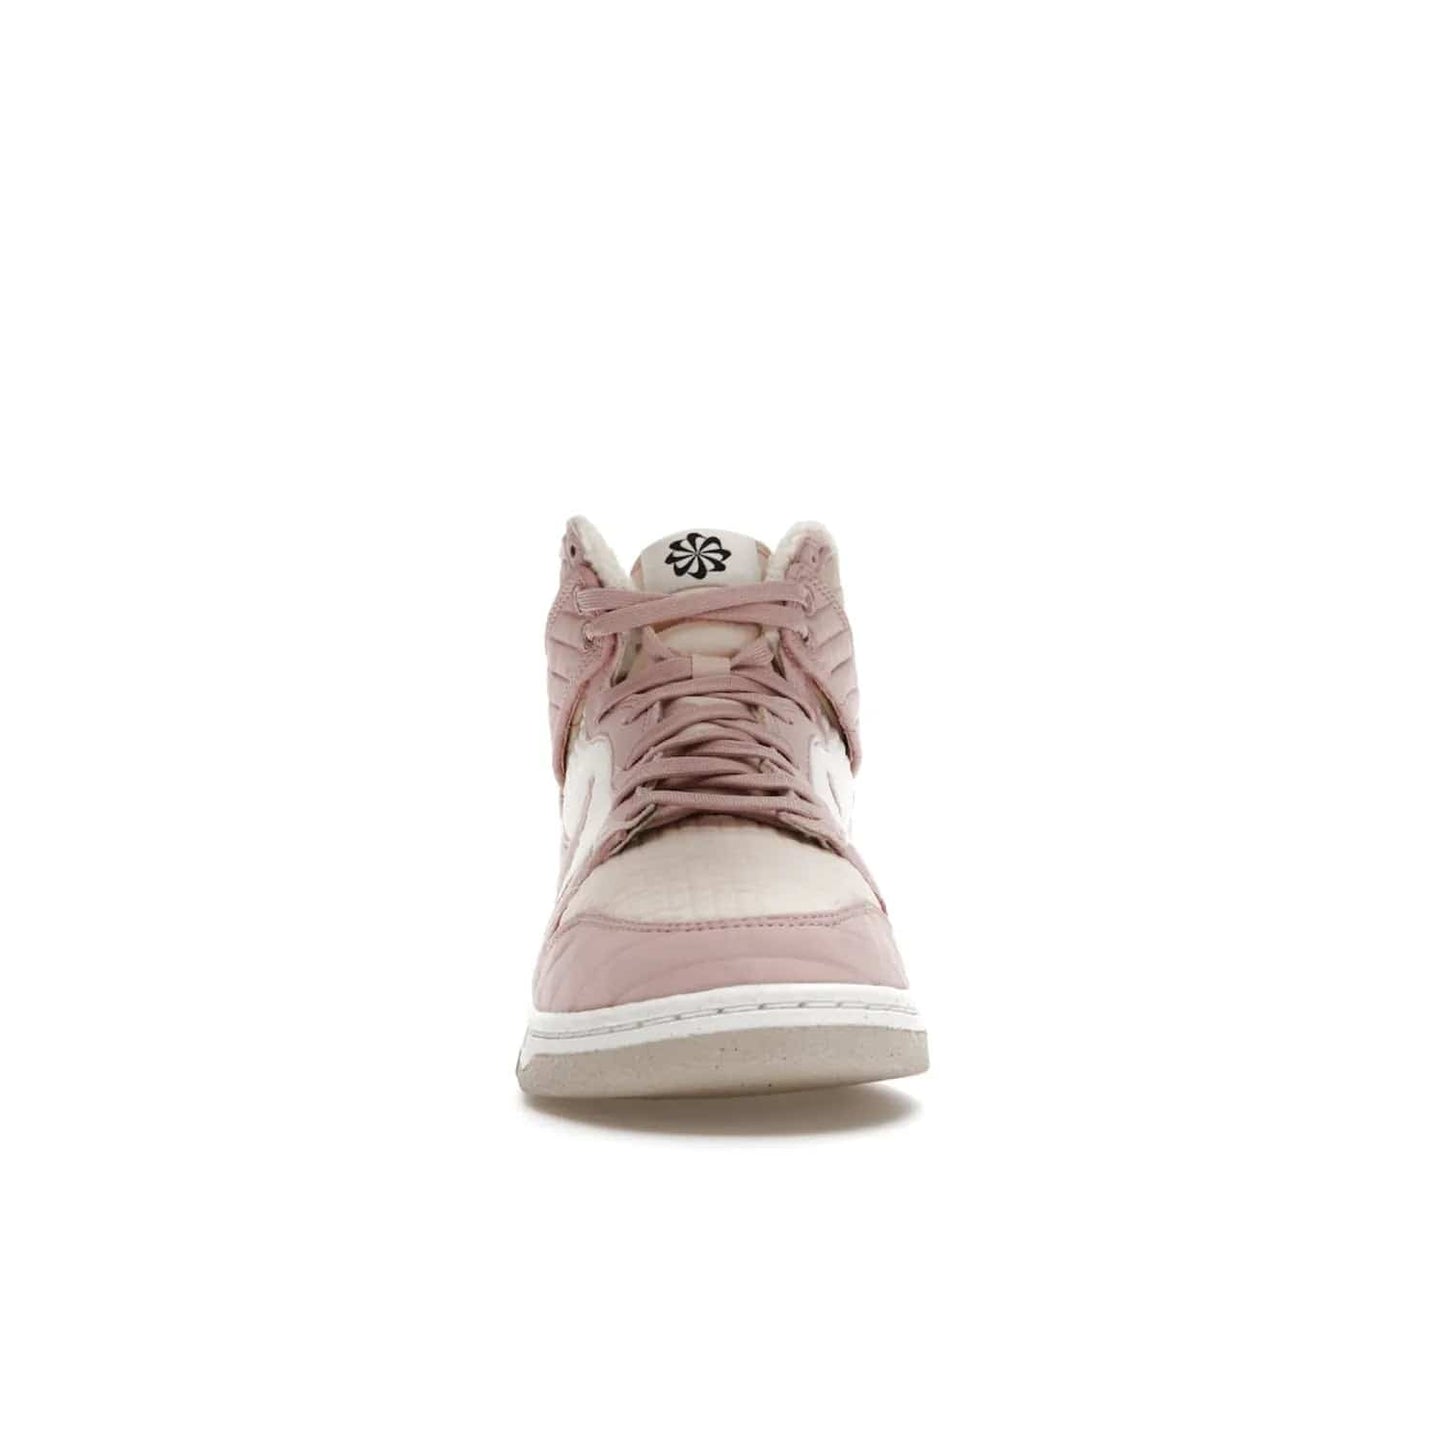 Nike Dunk High LX Next Nature Pink Oxford (Women's) - Image 10 - Only at www.BallersClubKickz.com - Cozy up in the Nike Dunk High LX Next Nature Pink Oxford for Women. Quilted upper, white midsole, soft fleece interior provide warmth and comfort for cold winter nights.